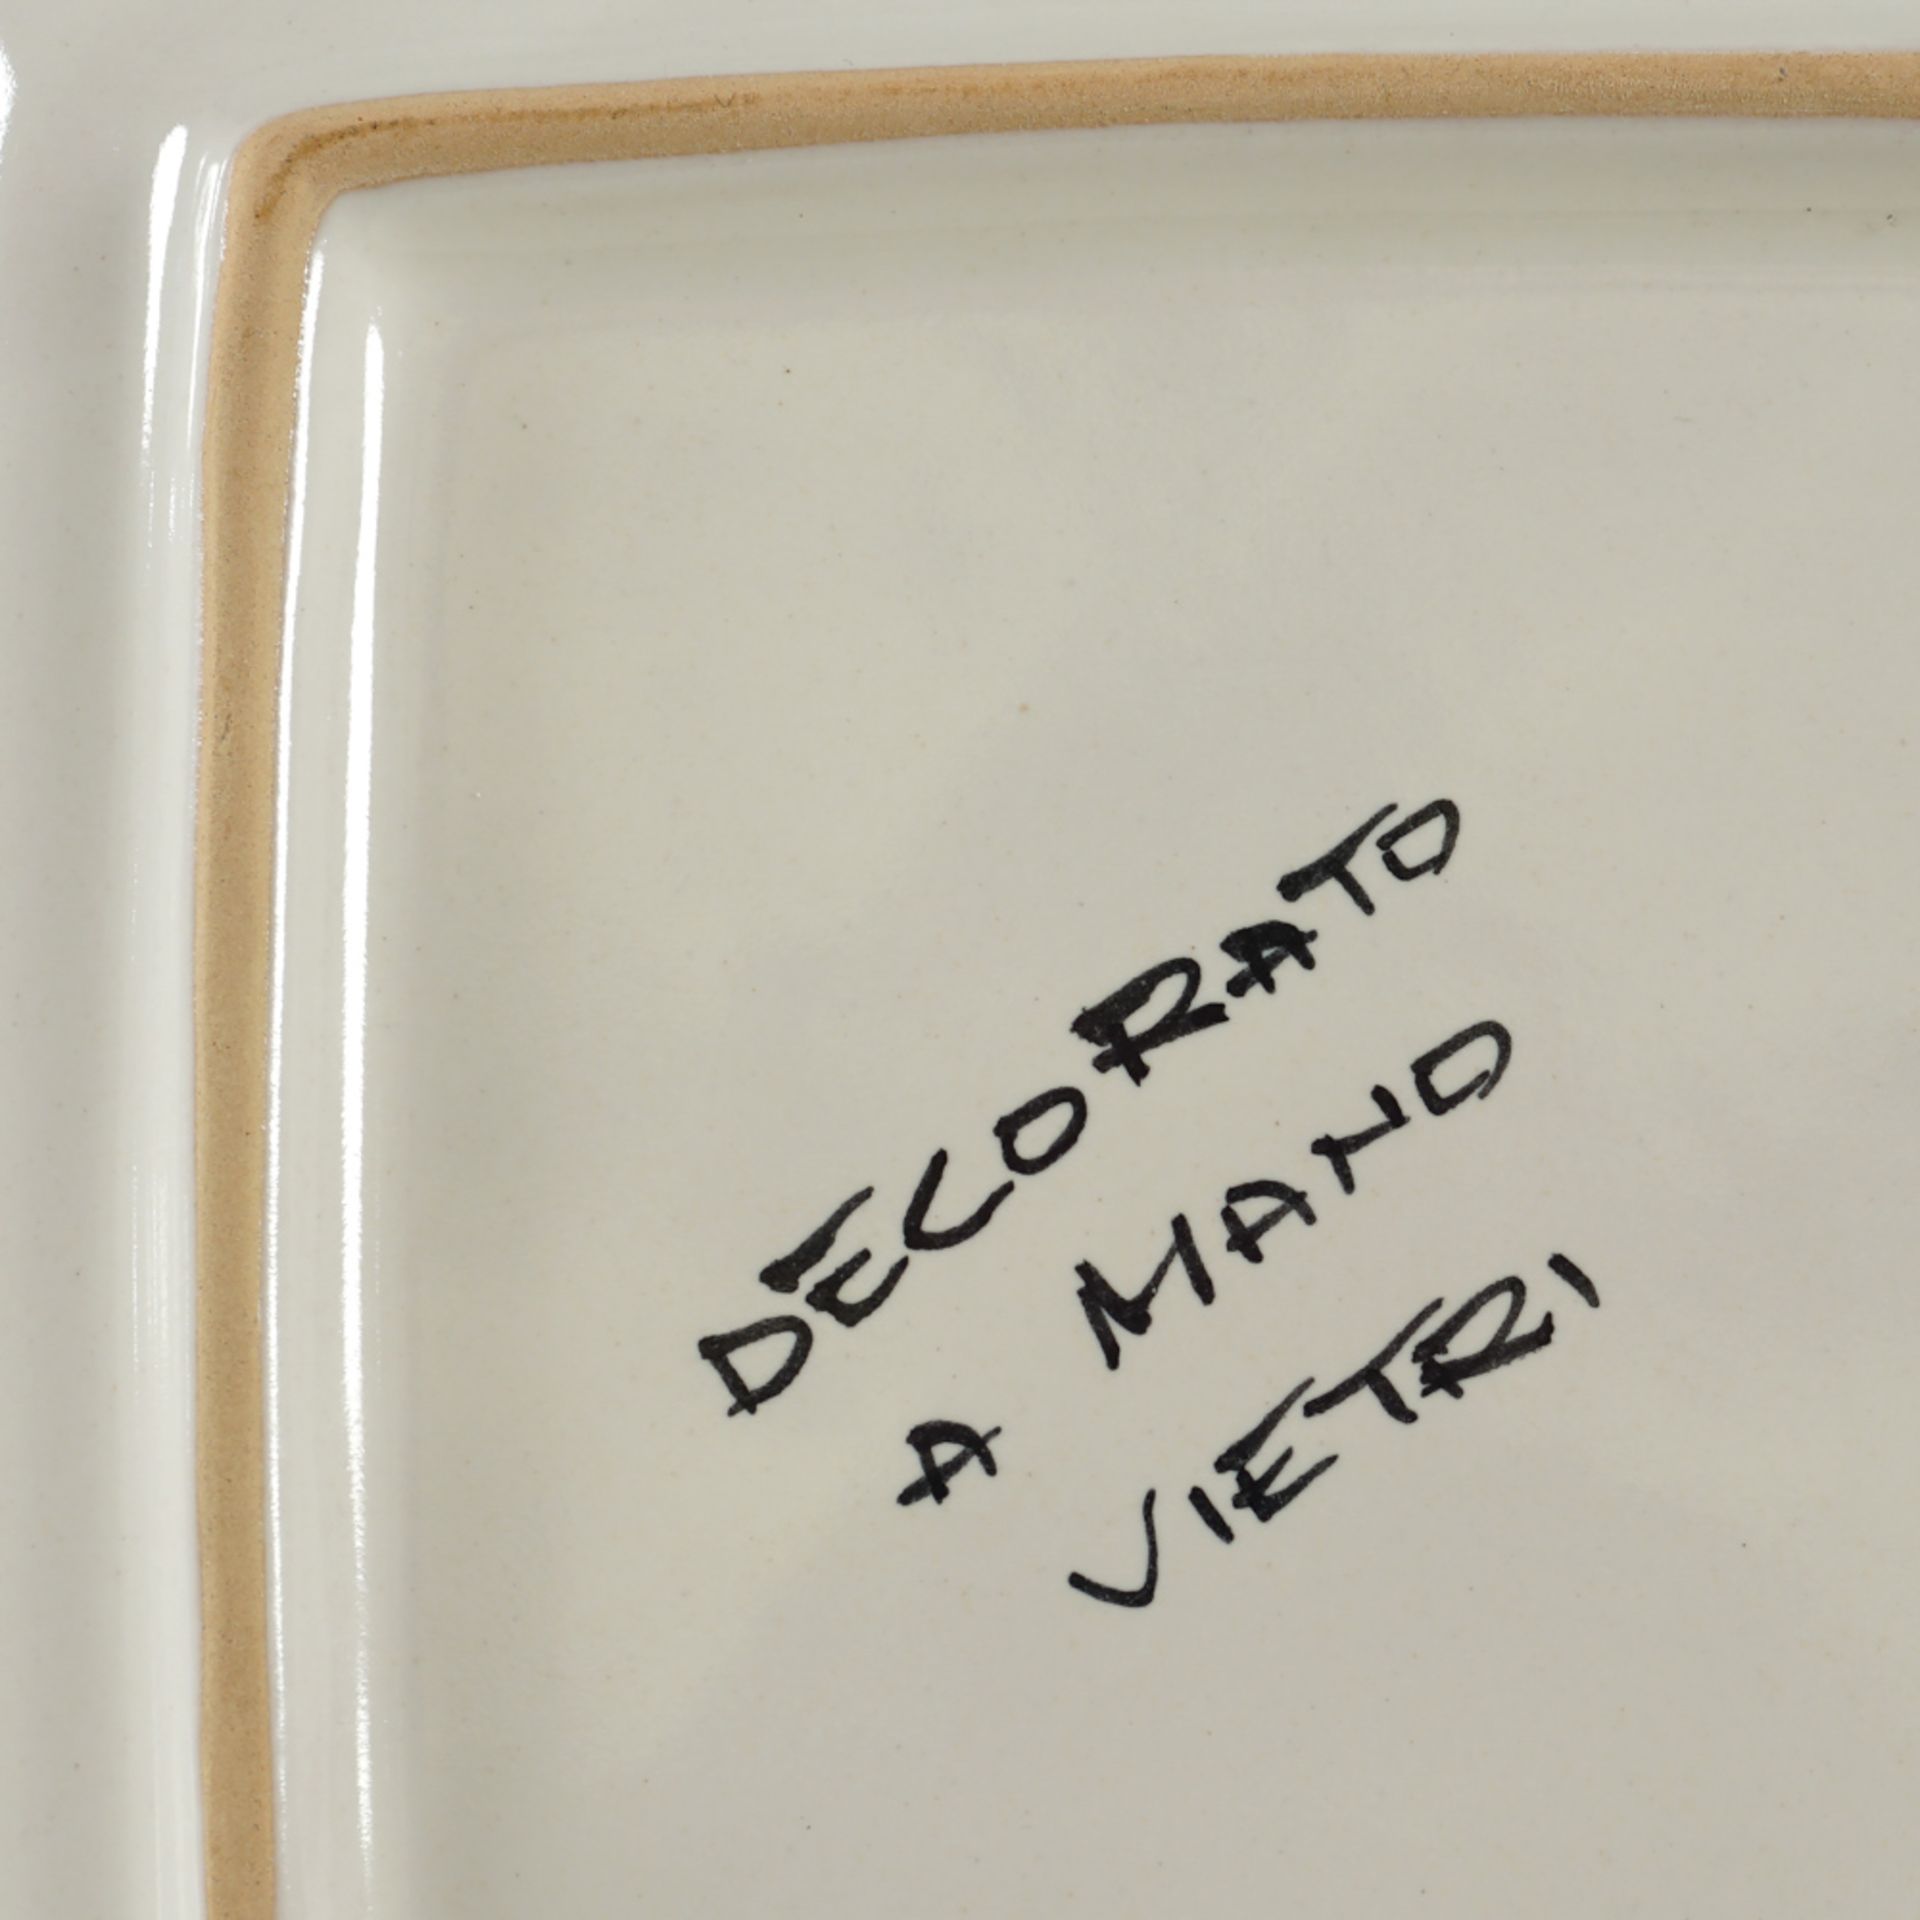 Polychrome ceramic table service (40) Vietri manufacture, 20th century comprising: 12 dinner plates, - Image 2 of 2